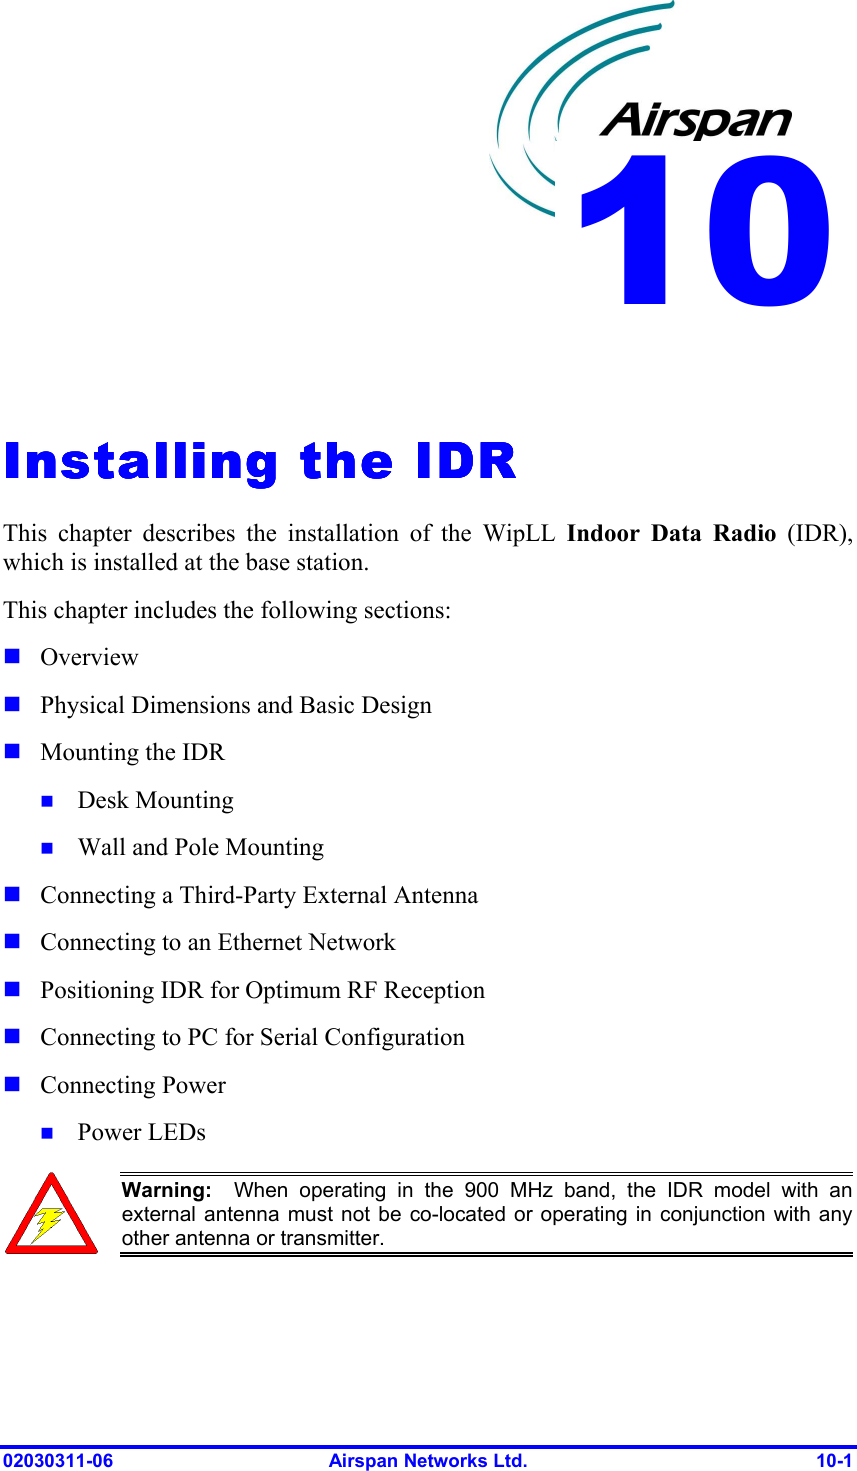  02030311-06  Airspan Networks Ltd.  10-1   Installing the IDRInstalling the IDRInstalling the IDRInstalling the IDR    This chapter describes the installation of the WipLL Indoor Data Radio (IDR), which is installed at the base station. This chapter includes the following sections: ! Overview ! Physical Dimensions and Basic Design ! Mounting the IDR  !  Desk Mounting !  Wall and Pole Mounting   ! Connecting a Third-Party External Antenna ! Connecting to an Ethernet Network ! Positioning IDR for Optimum RF Reception  ! Connecting to PC for Serial Configuration ! Connecting Power !  Power LEDs  Warning:  When operating in the 900 MHz band, the IDR model with an external antenna must not be co-located or operating in conjunction with any other antenna or transmitter.  10